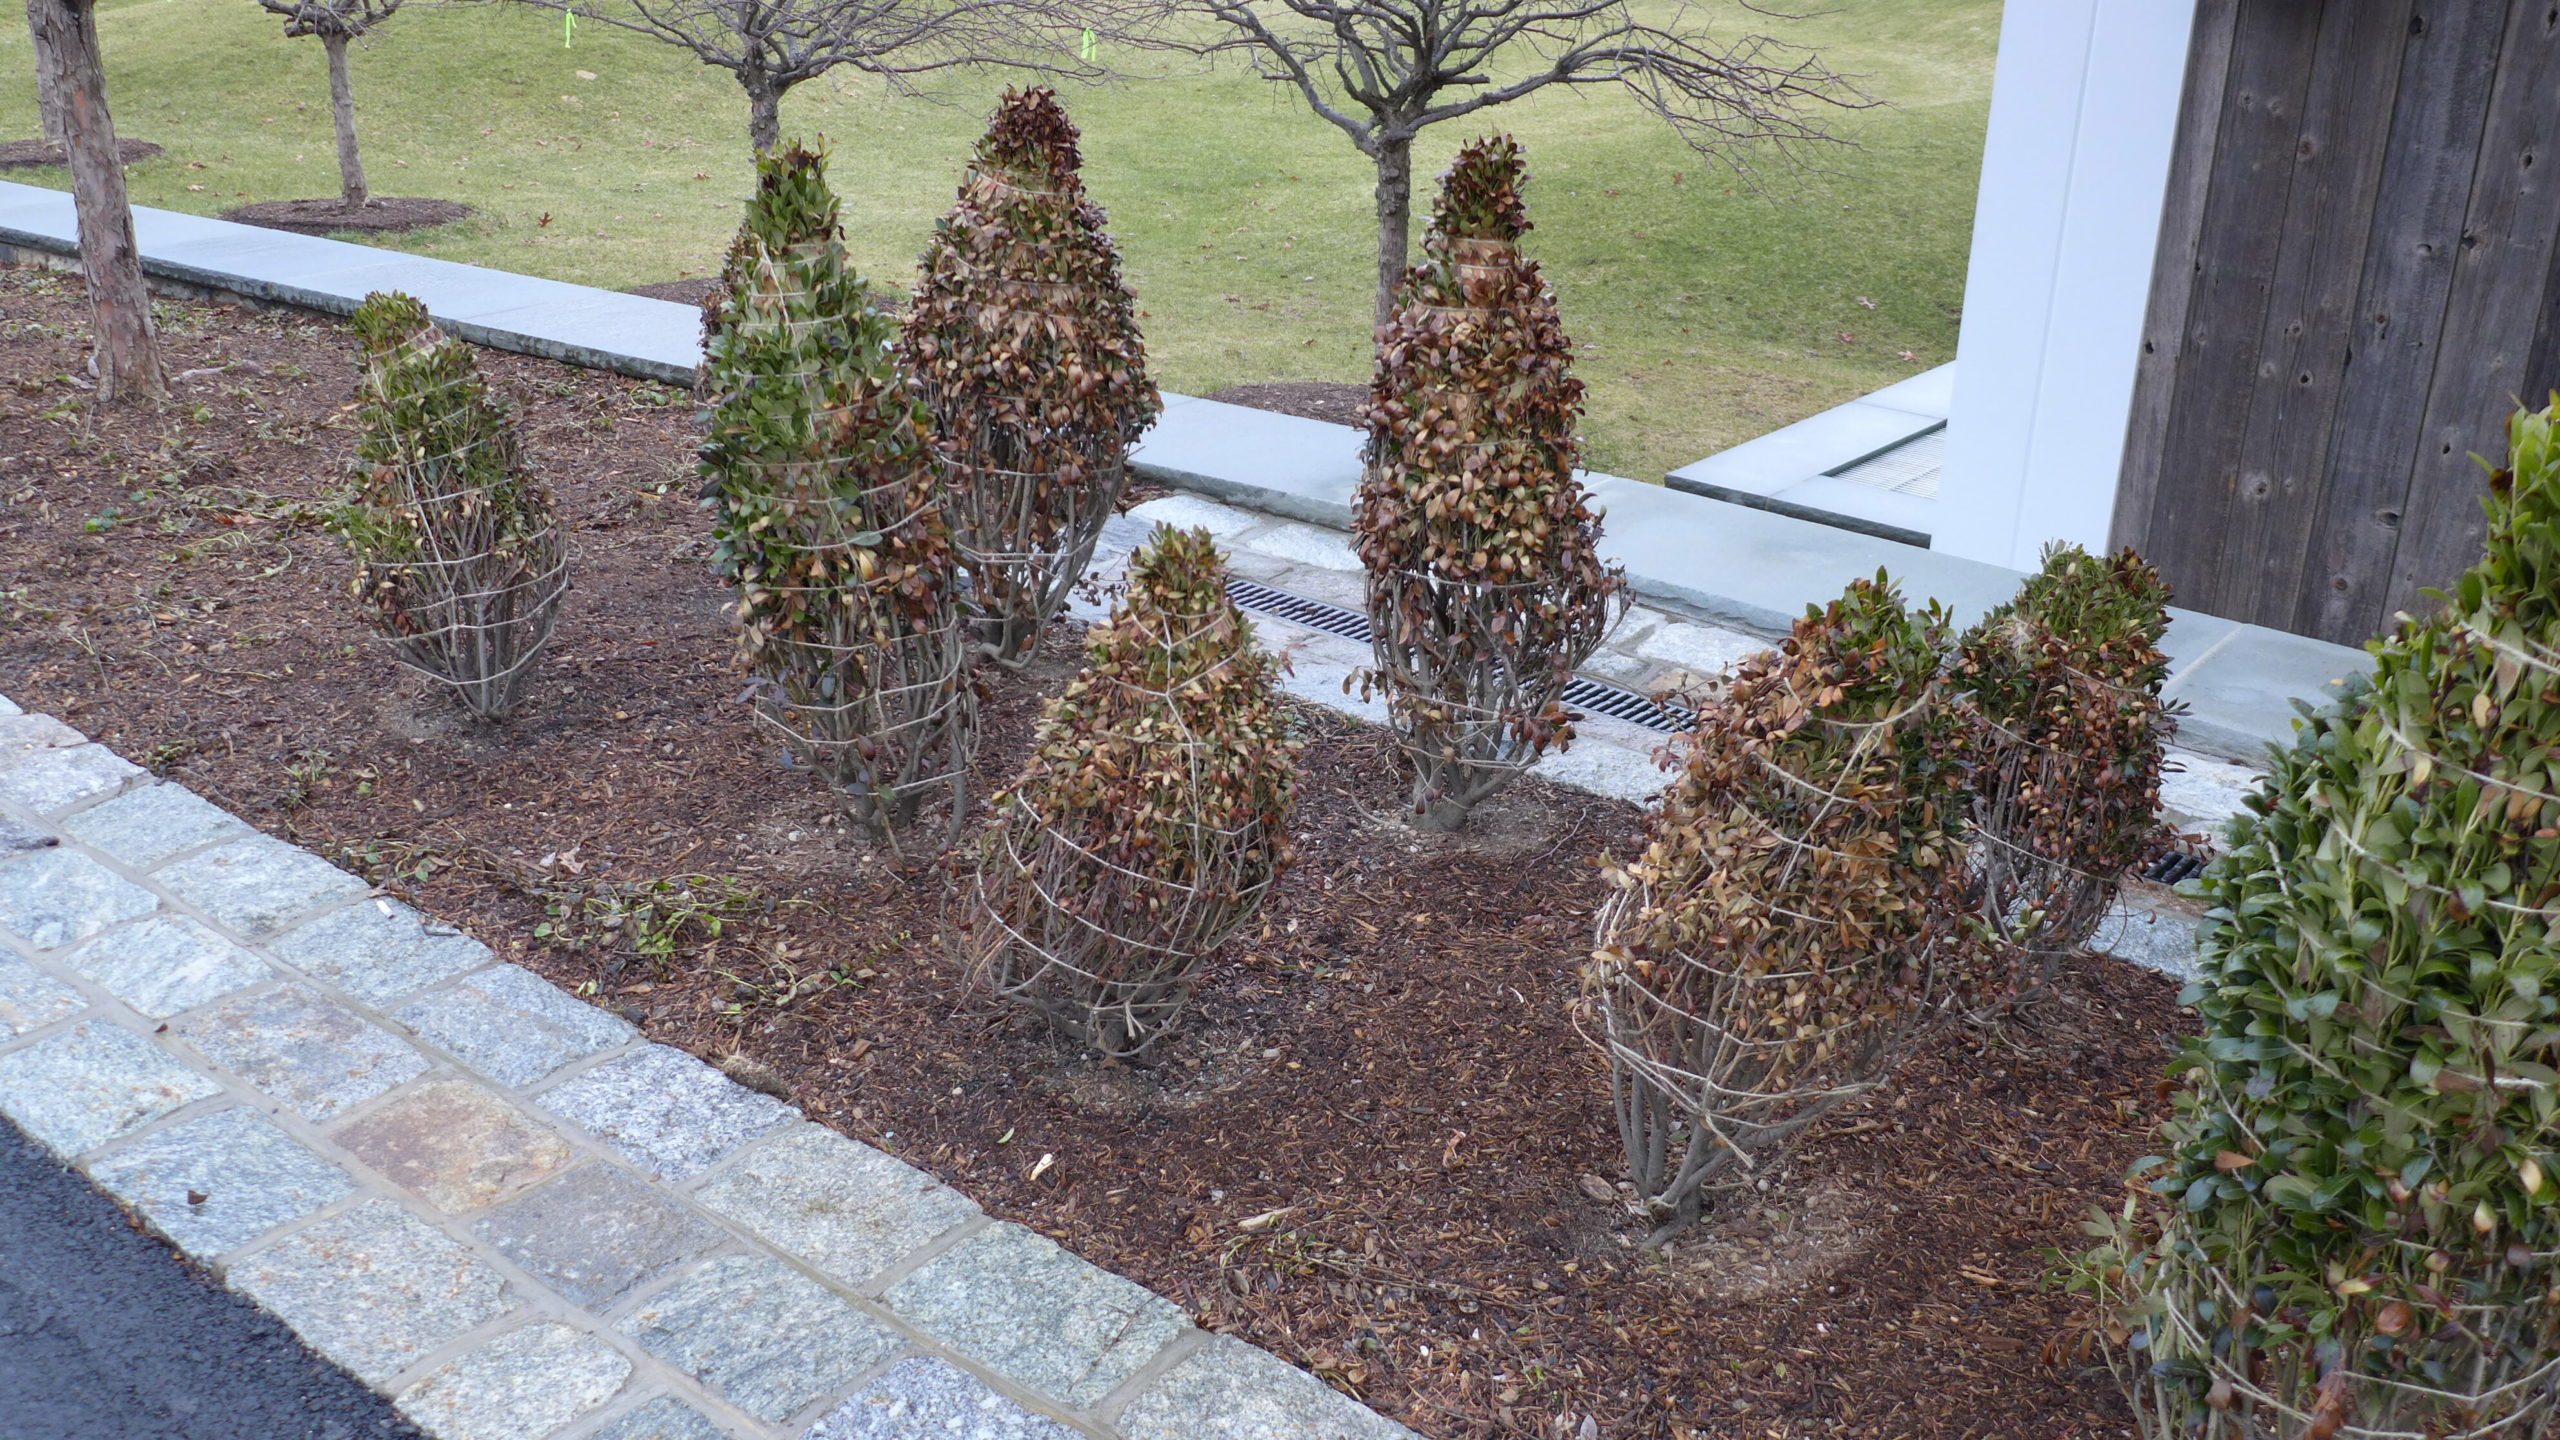 These fall-planted shrubs were tied to protect them from winter desiccation as they are semi-evergreen. Most of these plants died though, because while the shoot system was bundled, the soil totally dried out and the roots were killed.